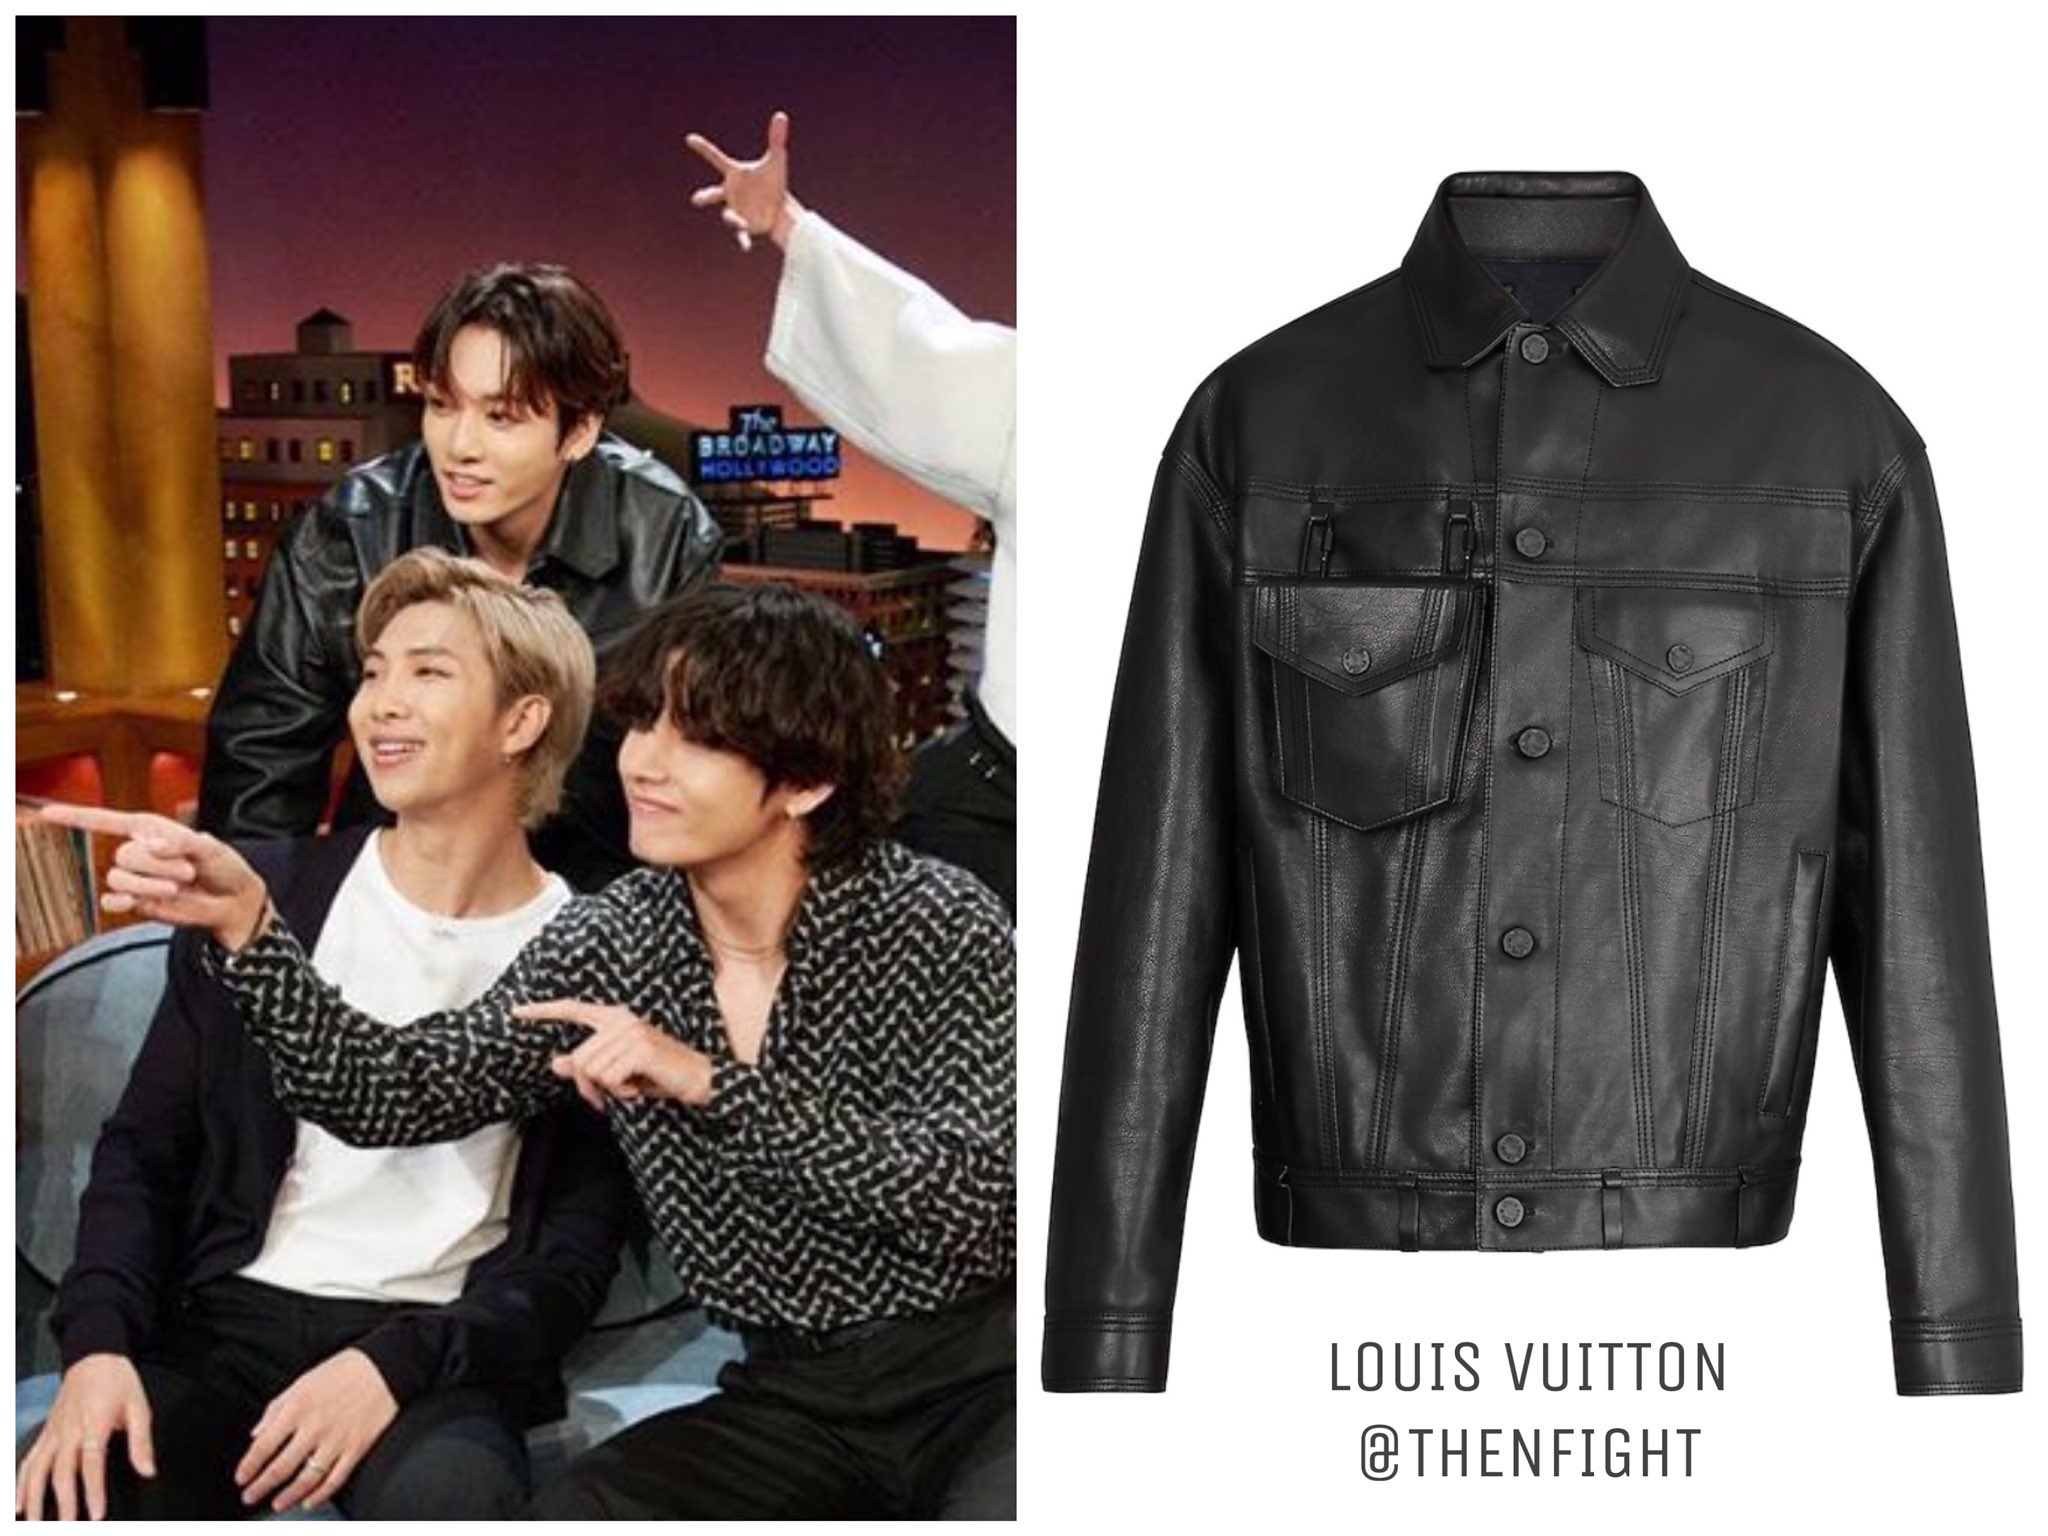 𝐽𝐾 📁 on X: [MEDIA] Louis Vuitton Denim Jacket $2,350 sold out thanks to  Jungkook. True to the name 'God of sold out', the Jacket Jungkook wore  quickly sold out in just